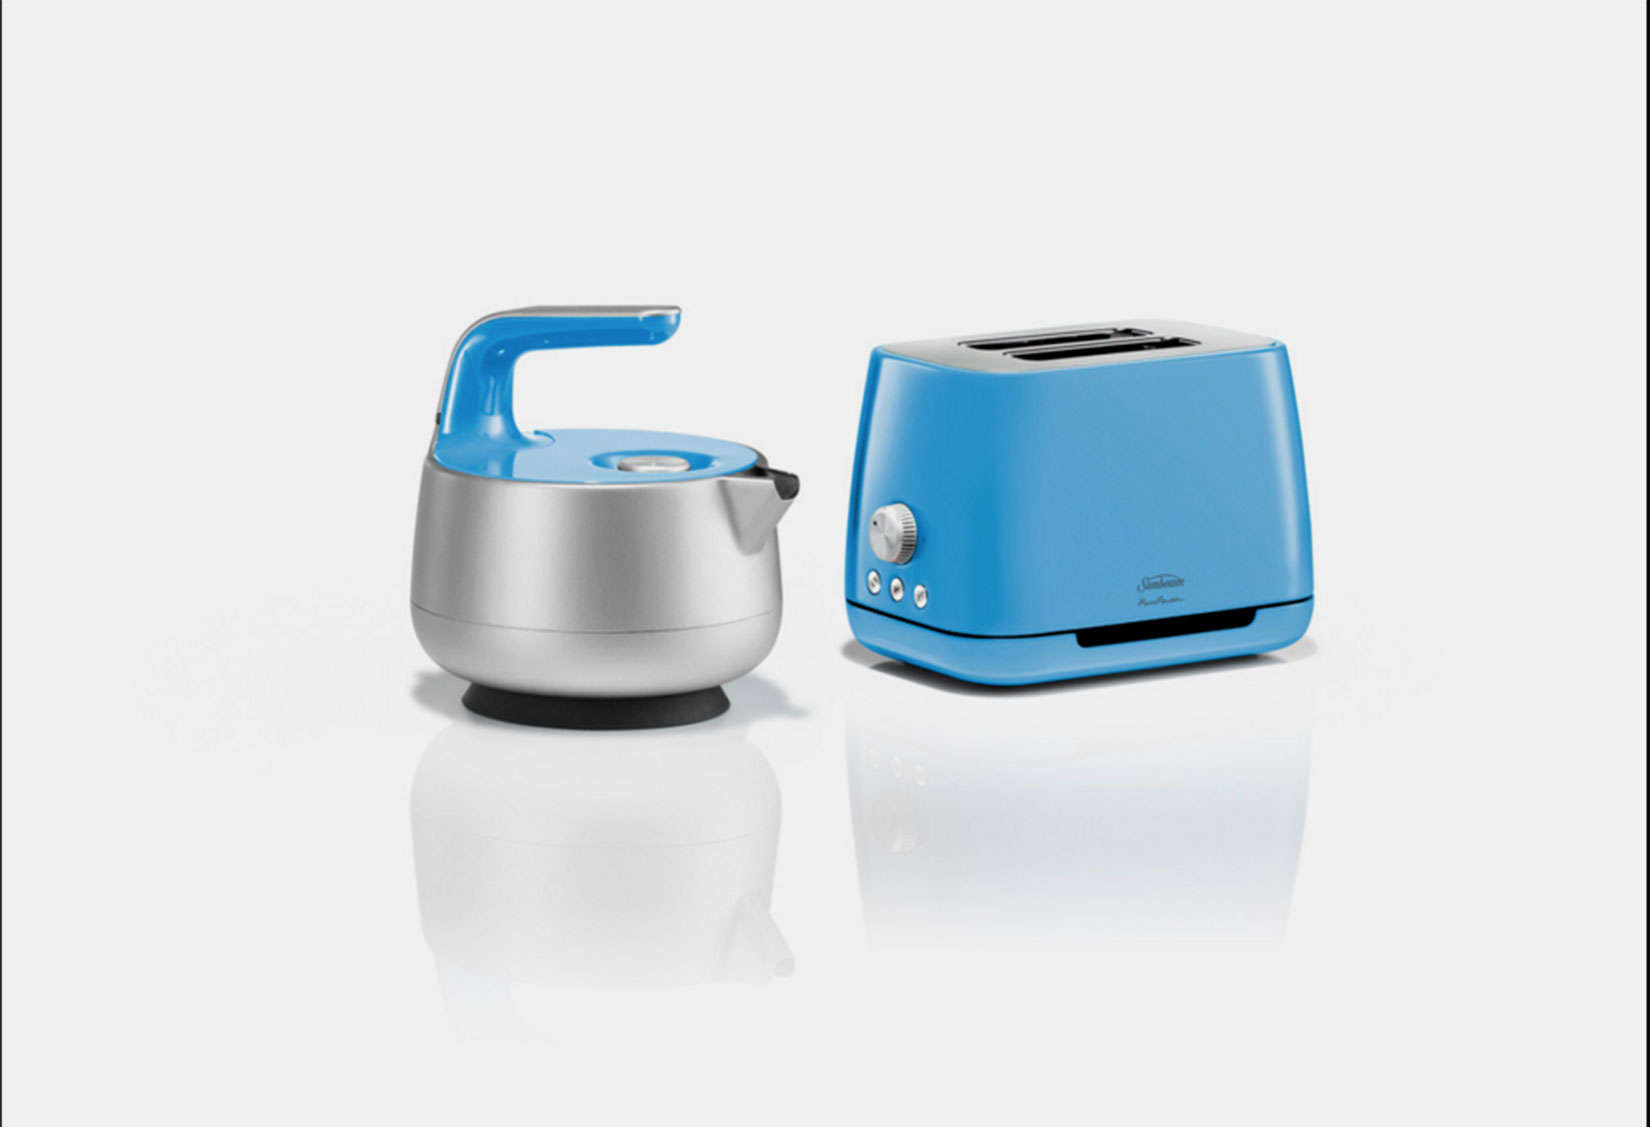 Industrial designer Marc Newson designed a teapot and toaster for Sunbeam.